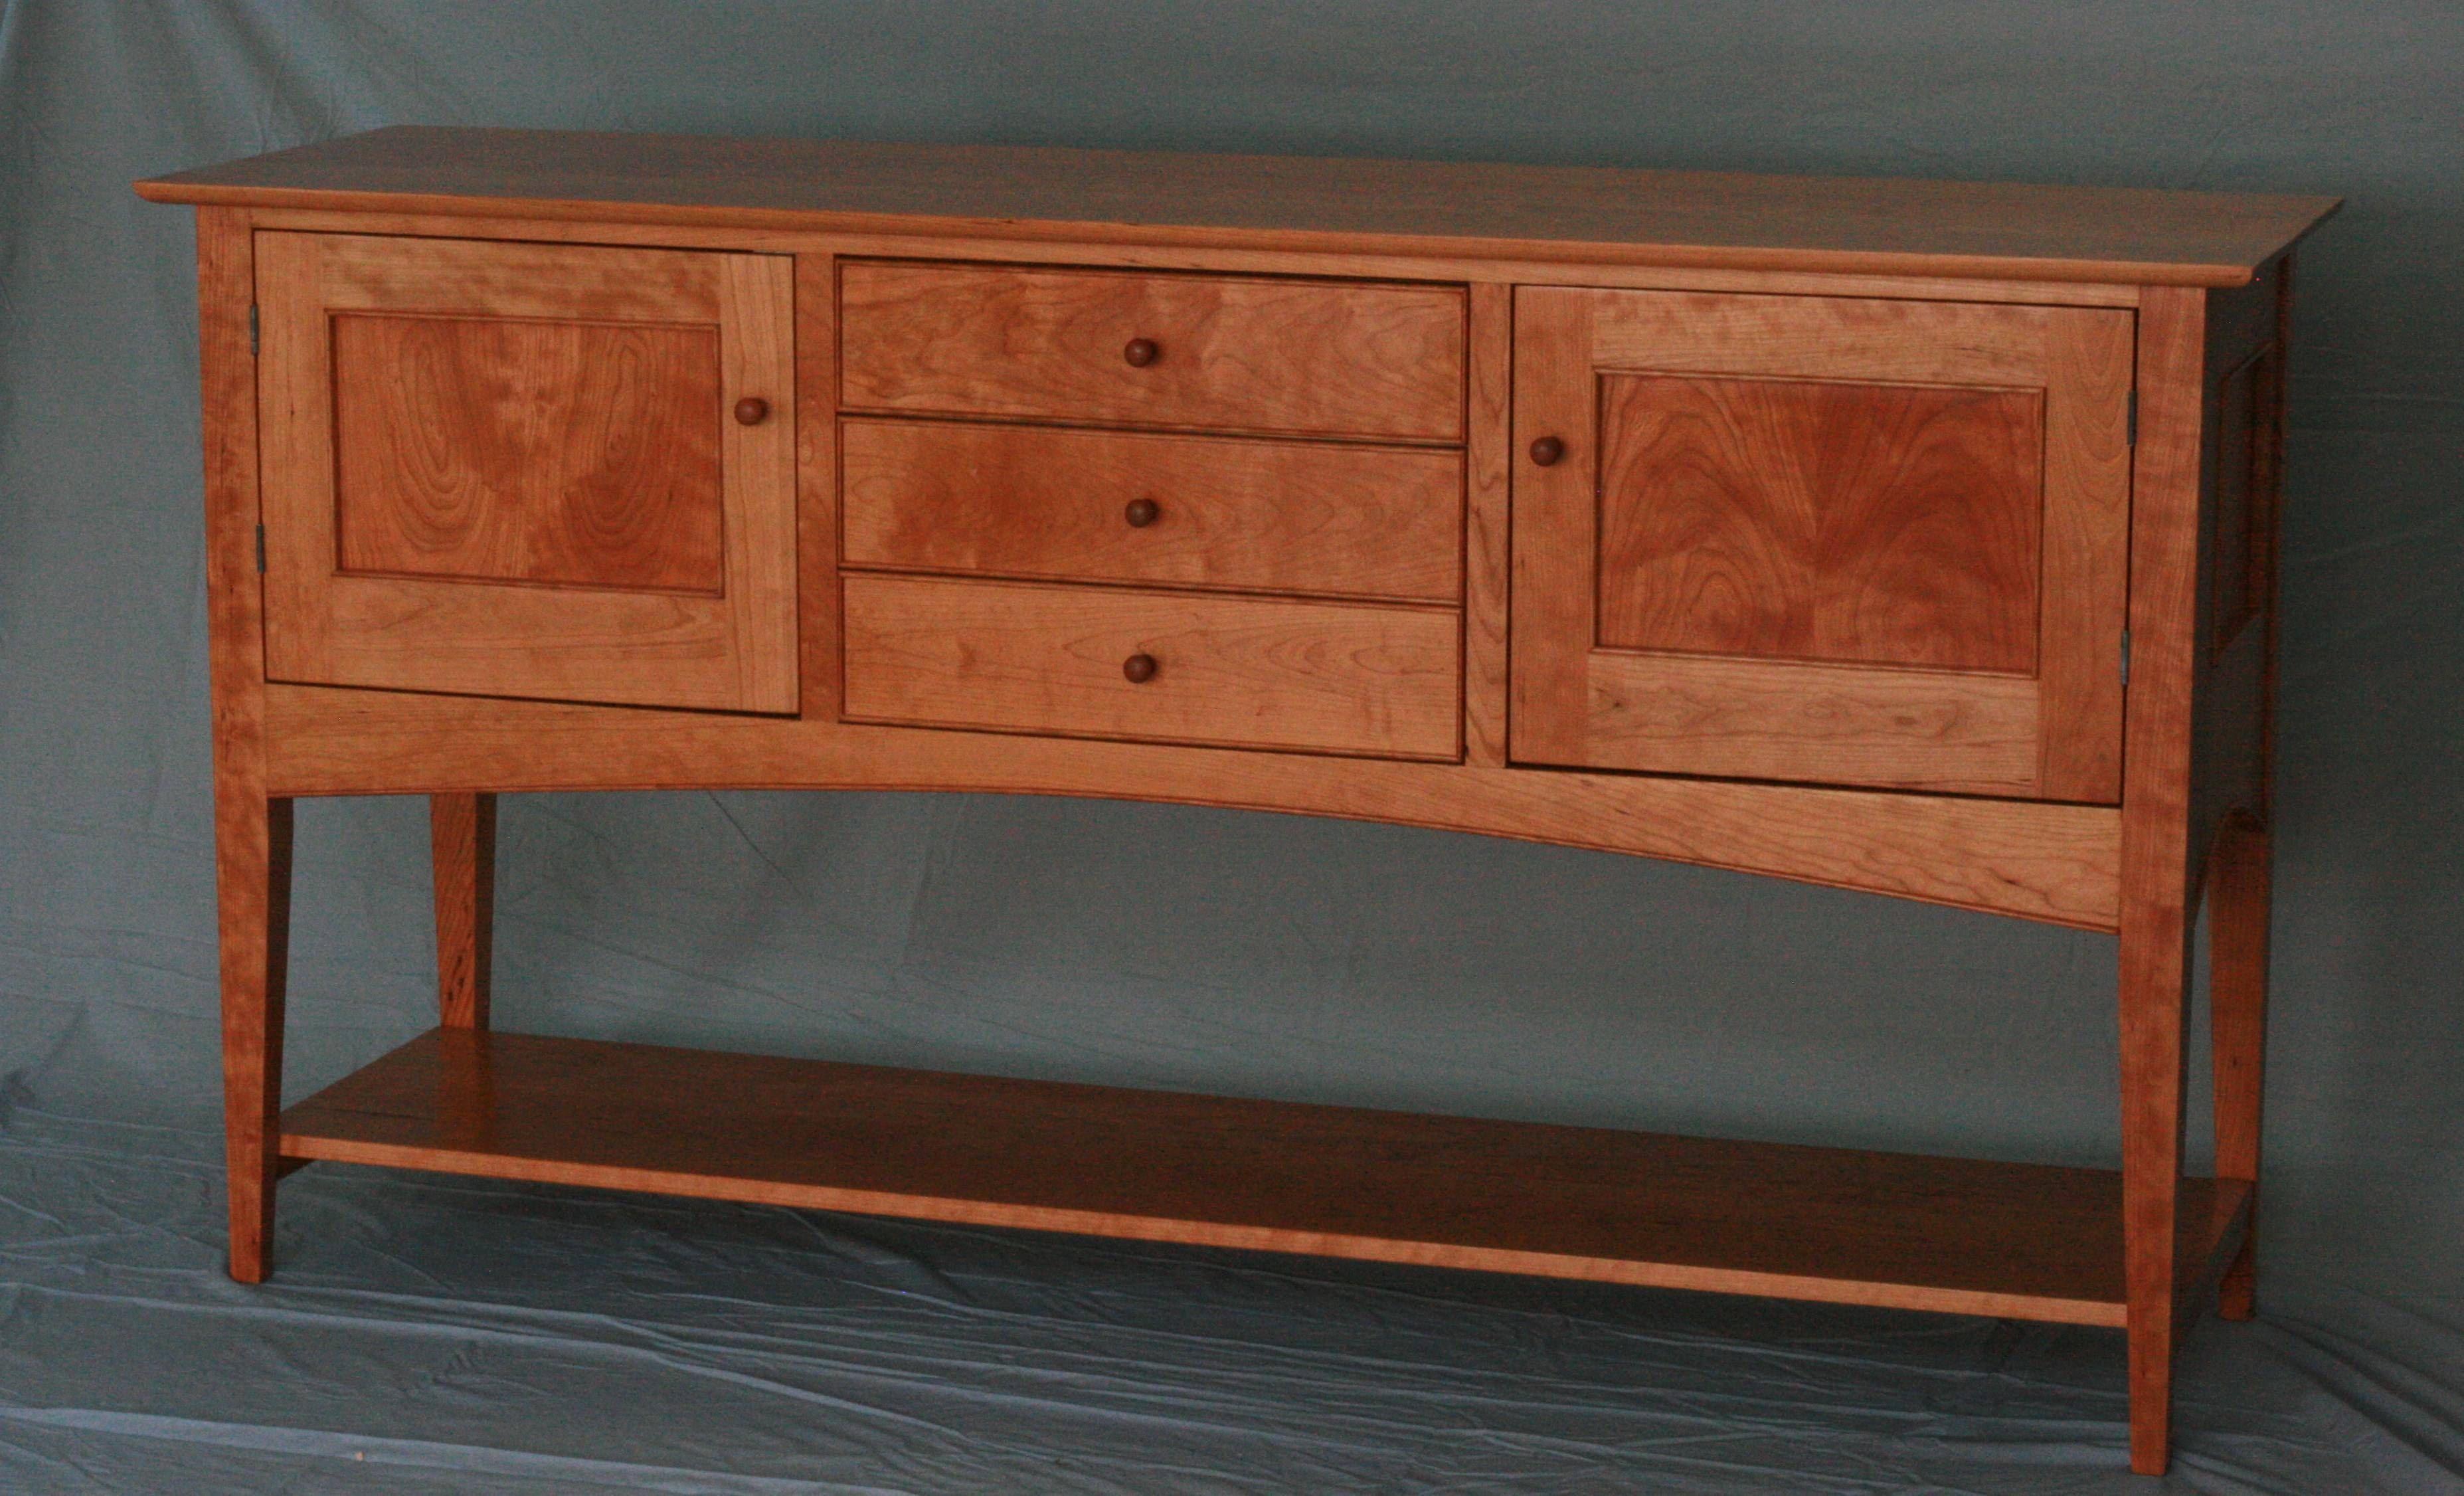 Furniture: Exciting Buffet Sideboard With Simple Amerock For In Sideboard Buffet Furniture (View 9 of 15)